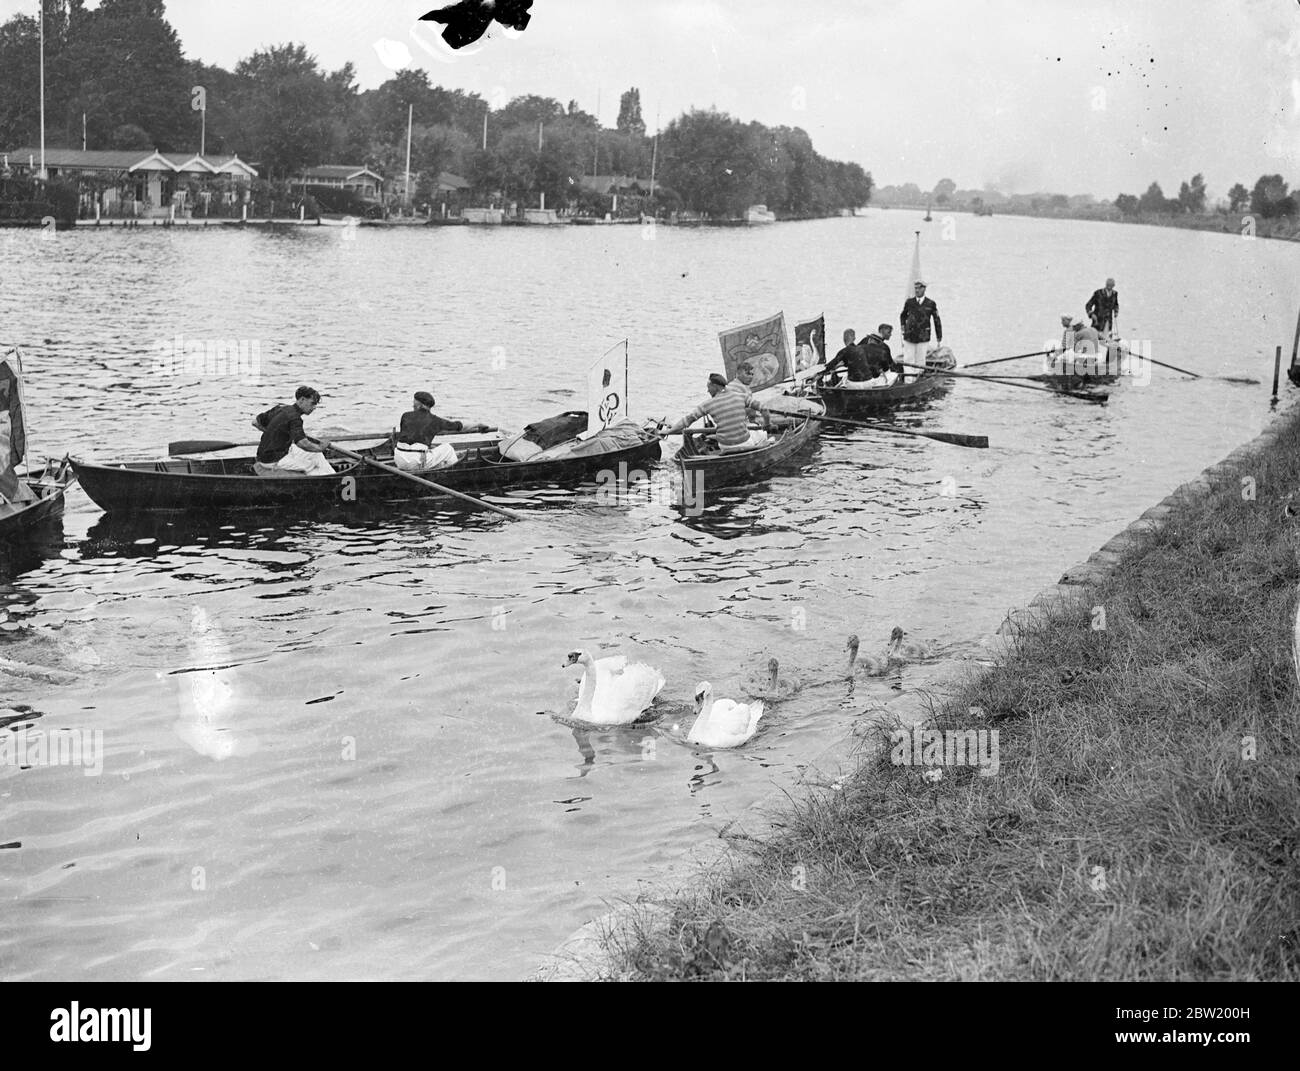 Three brothers - Swan Masters for the King and two City Companies - commenced the task of rounding up and marking swans and cygnets on the River Thames from London to Henley. The privilege of owning swans on the river is reserved to the King and the ancient Dyers and Vintners Companies. 18 July 1937 Stock Photo